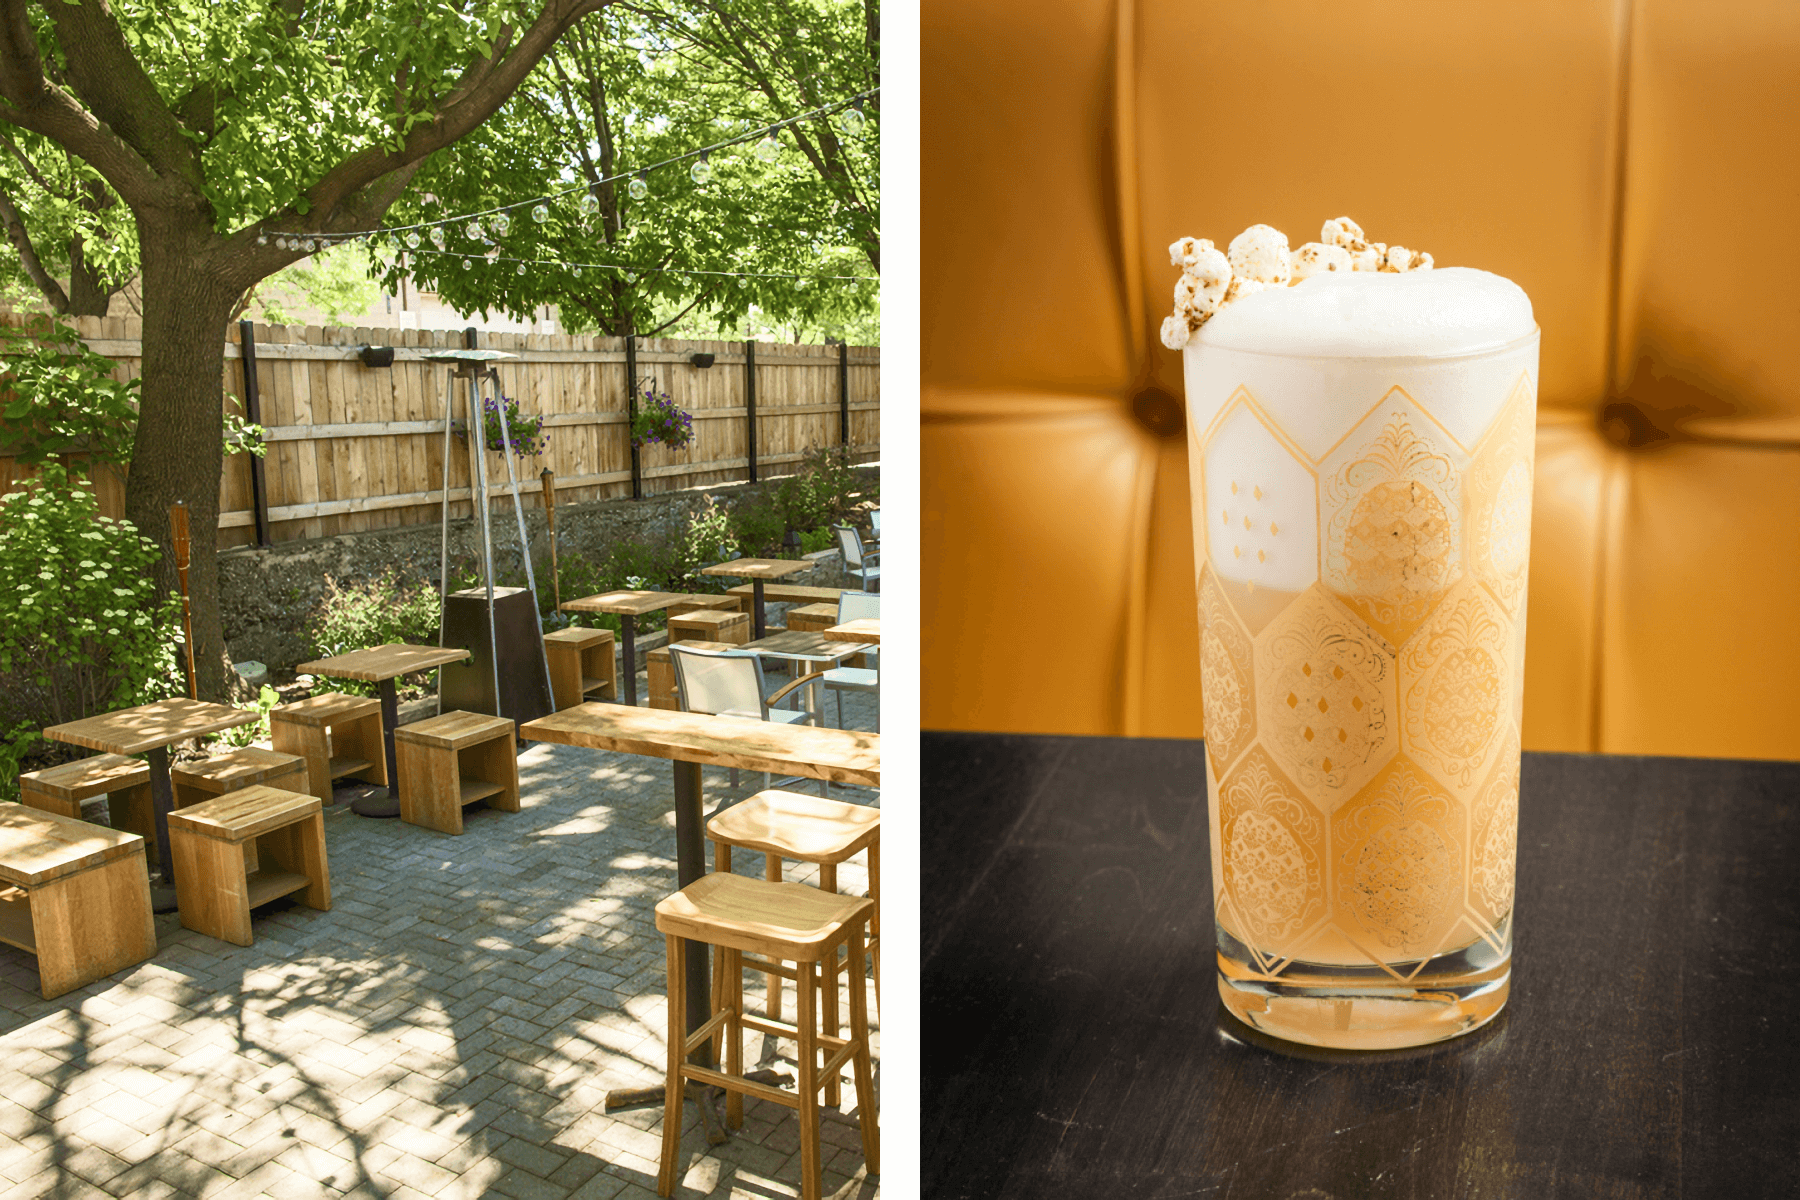 Left: Outdoor seating at The Duck Inn; Right: Close up of a cocktail.